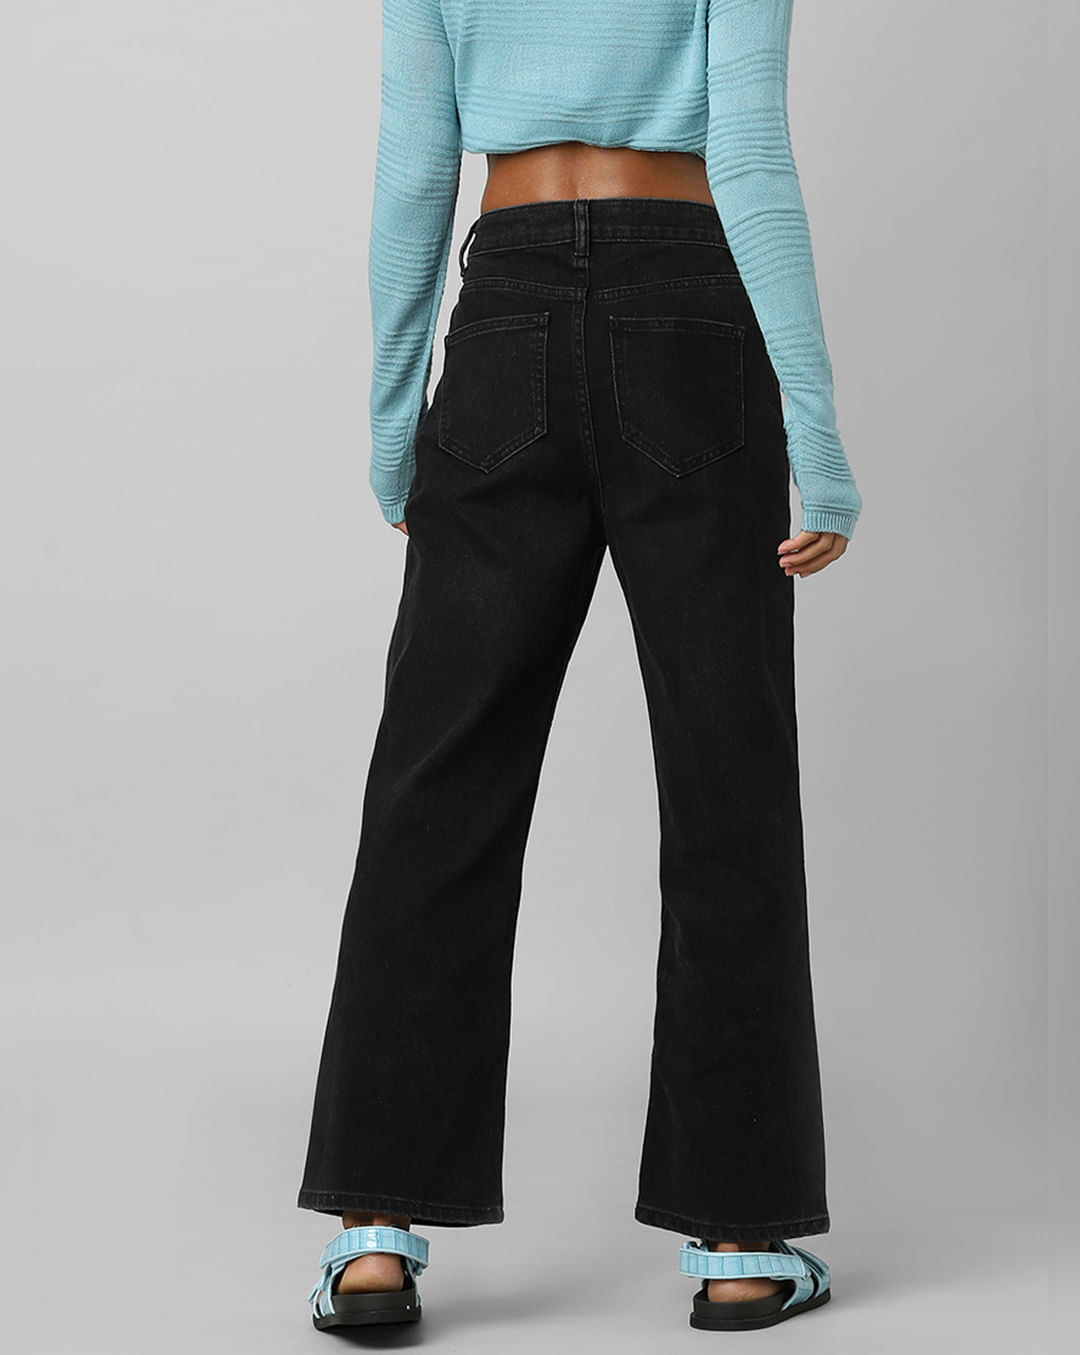 Buy Black High Rise Wide Leg Jeans For Women Online - ONLY